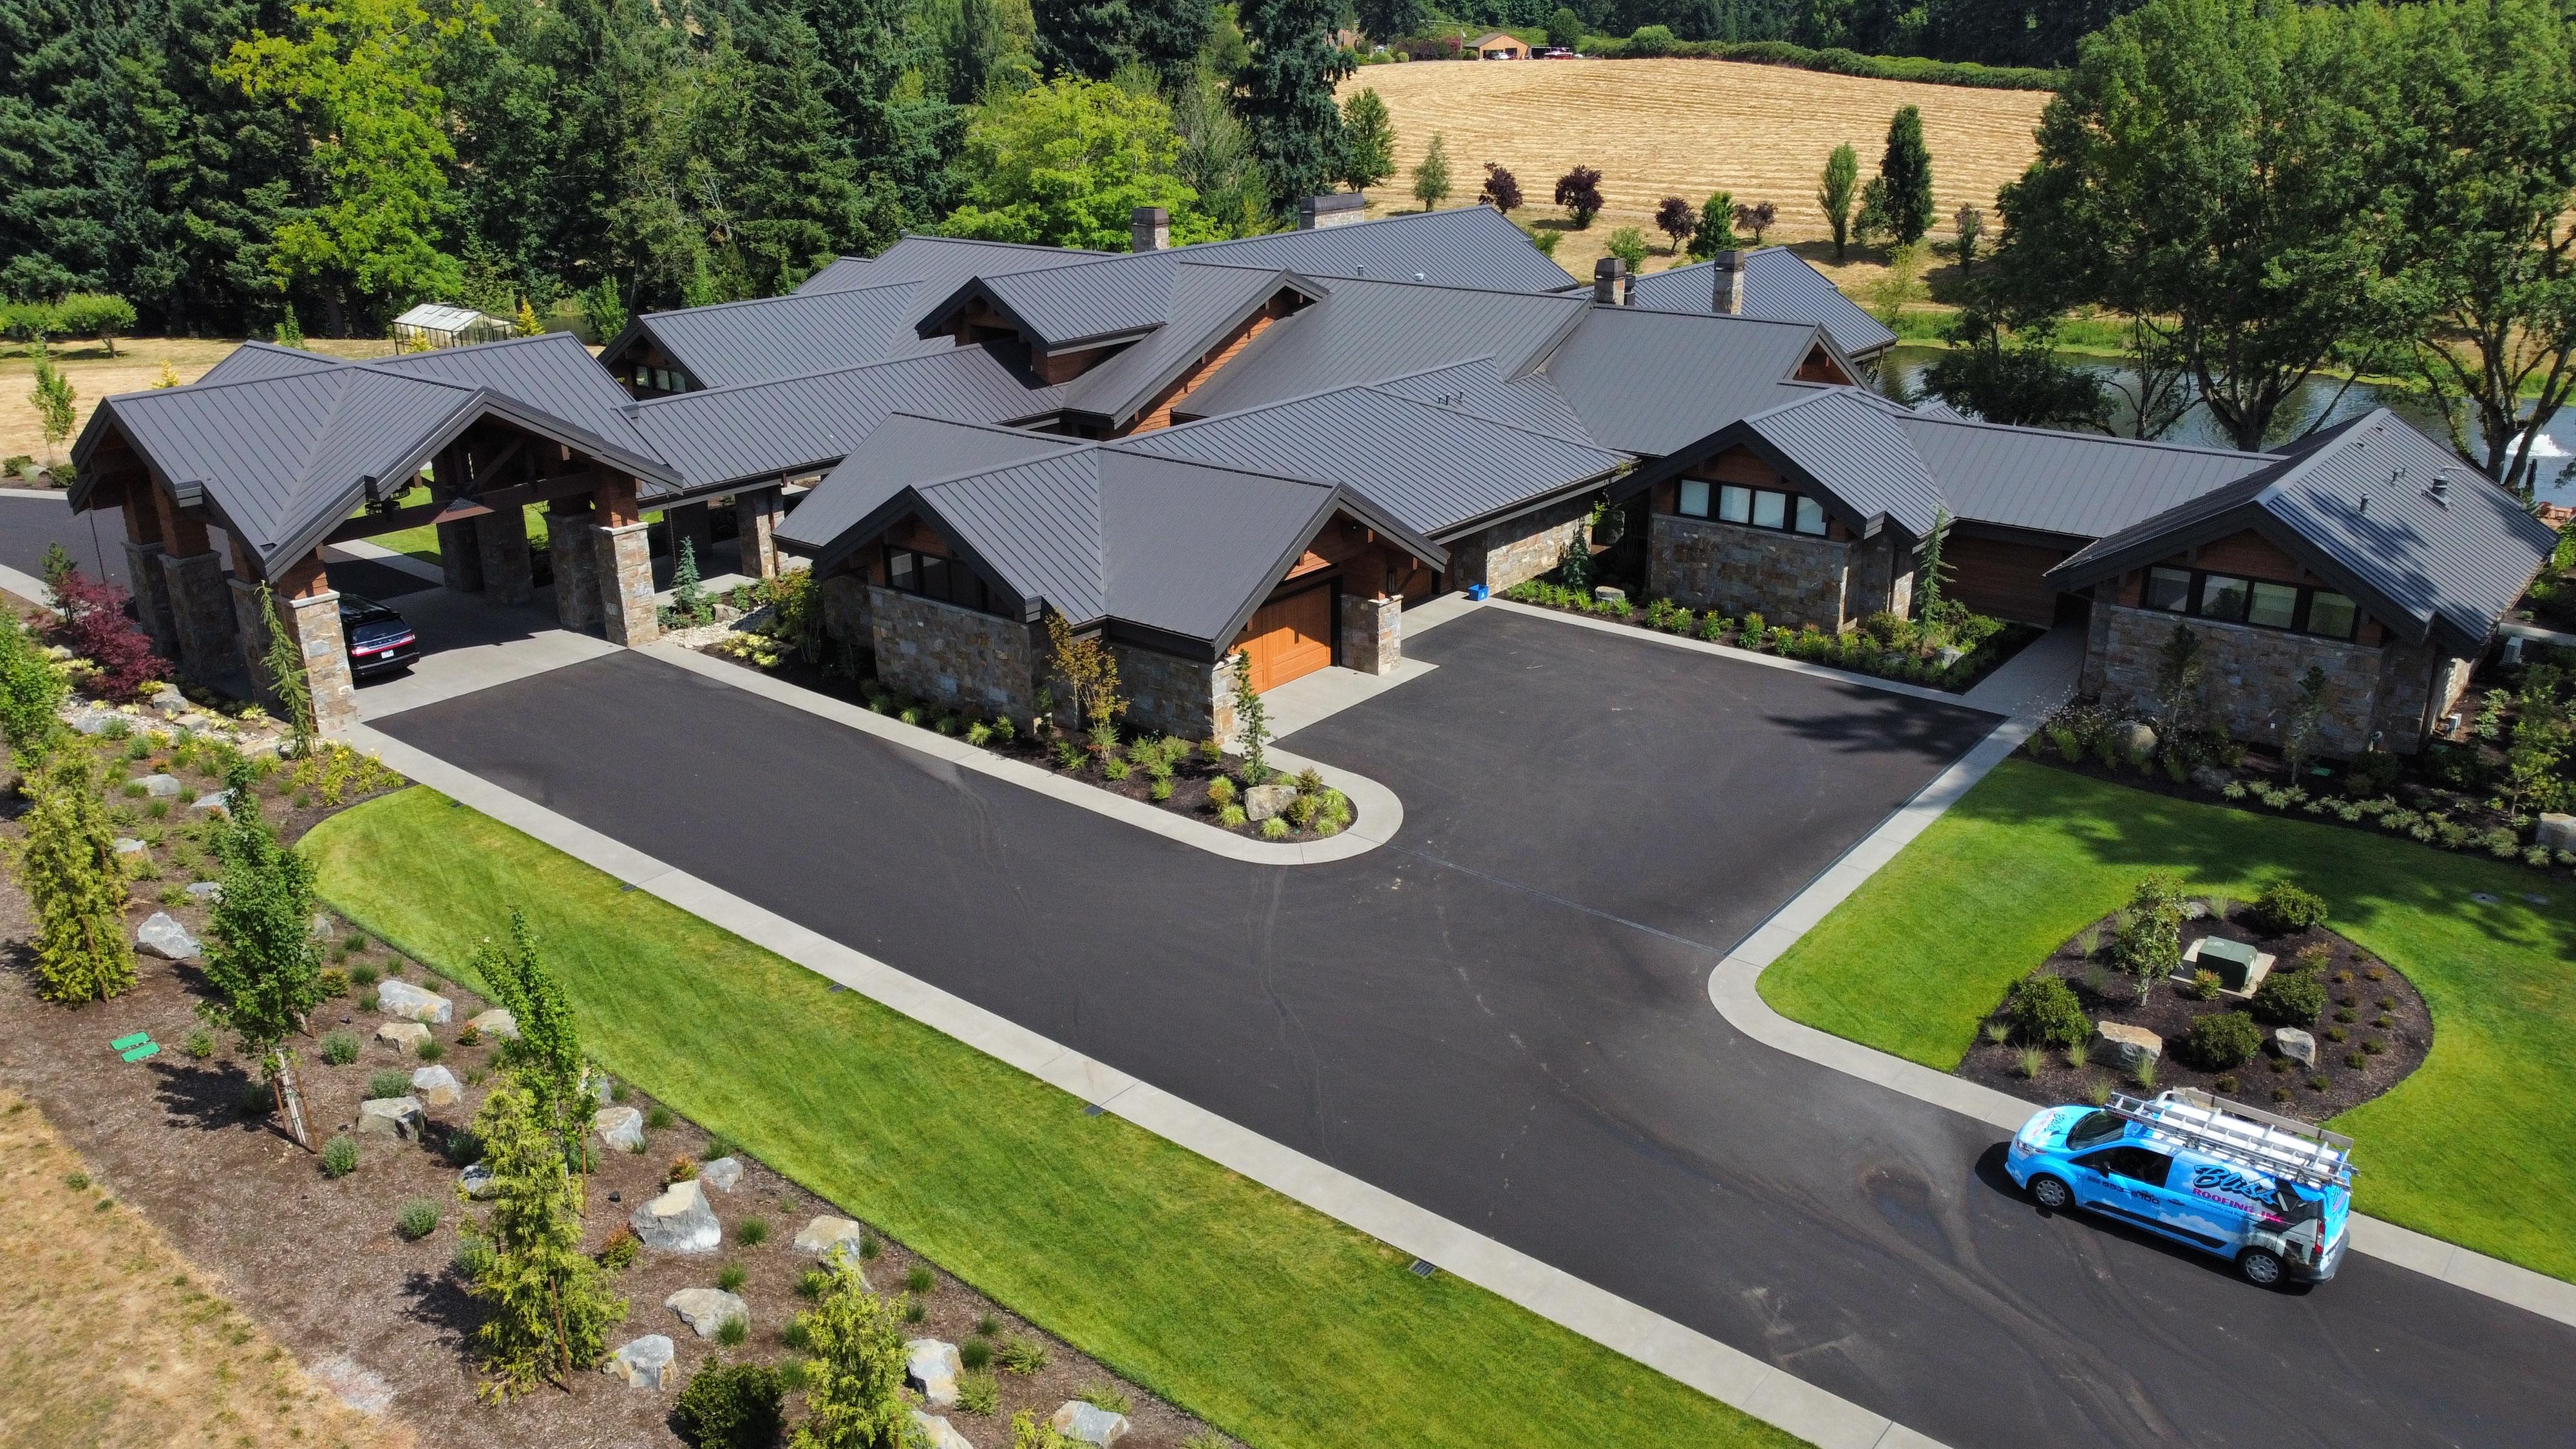 Bliss Roofing of Clackamas, Oregon